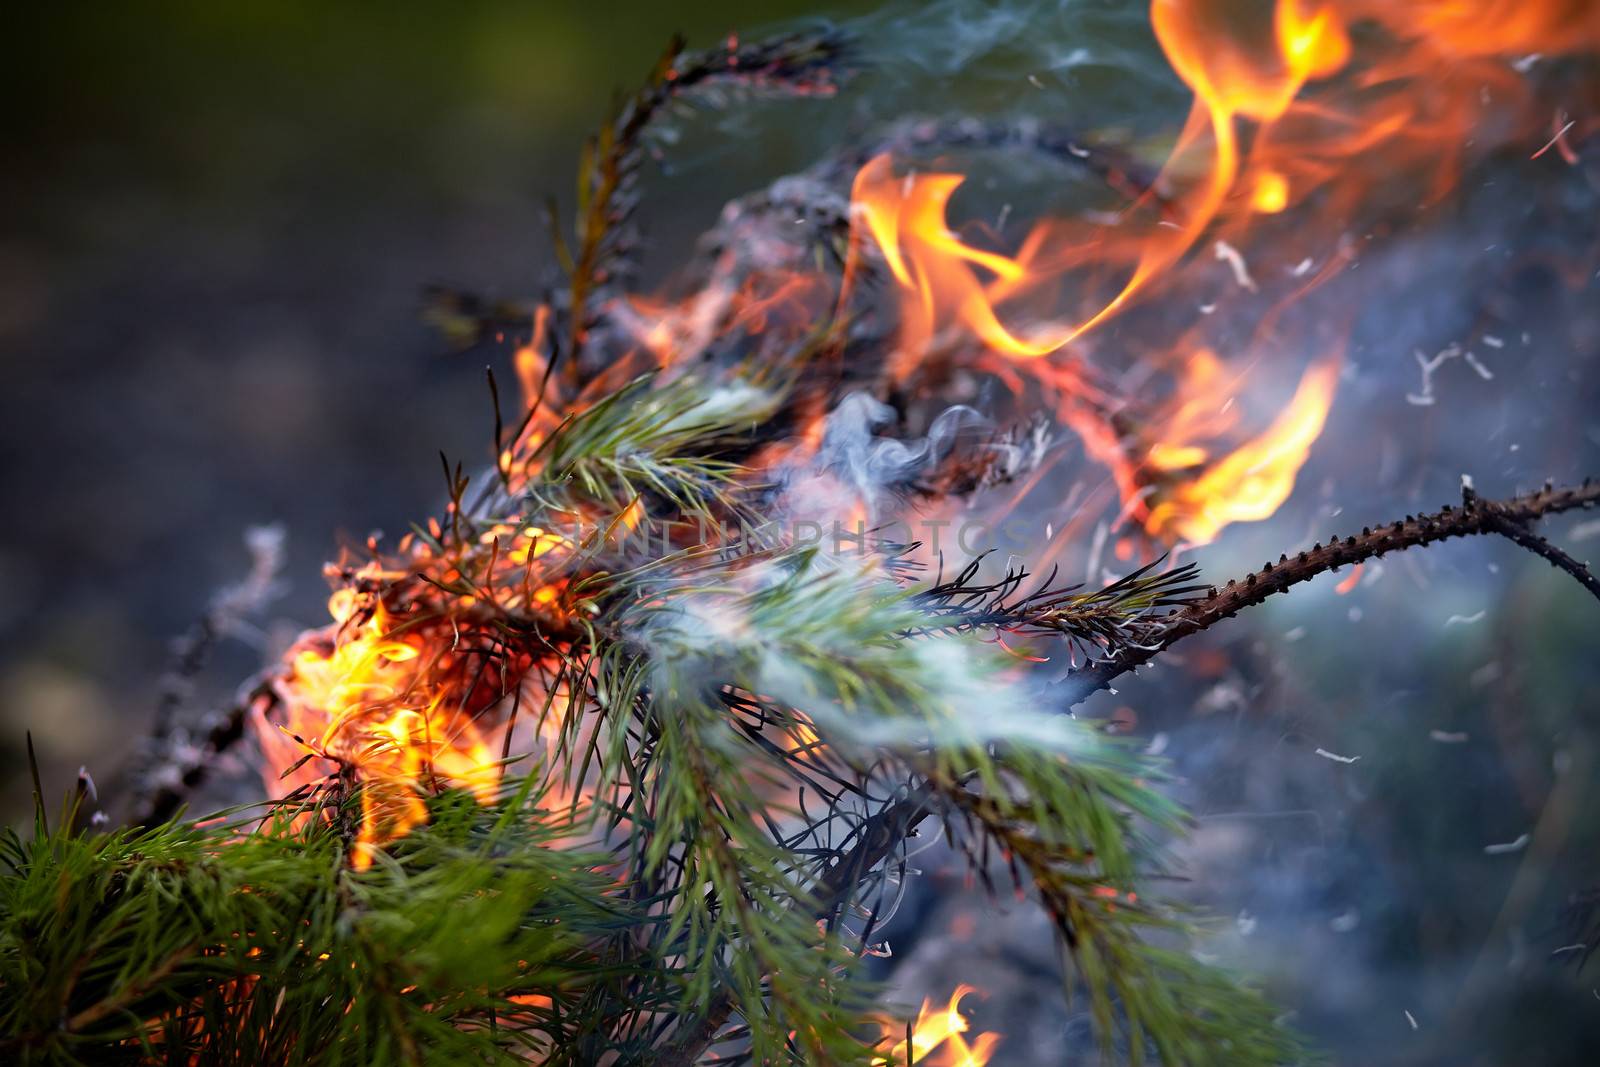 Forest fire. Burning pine branches. Fire in marching conditions.